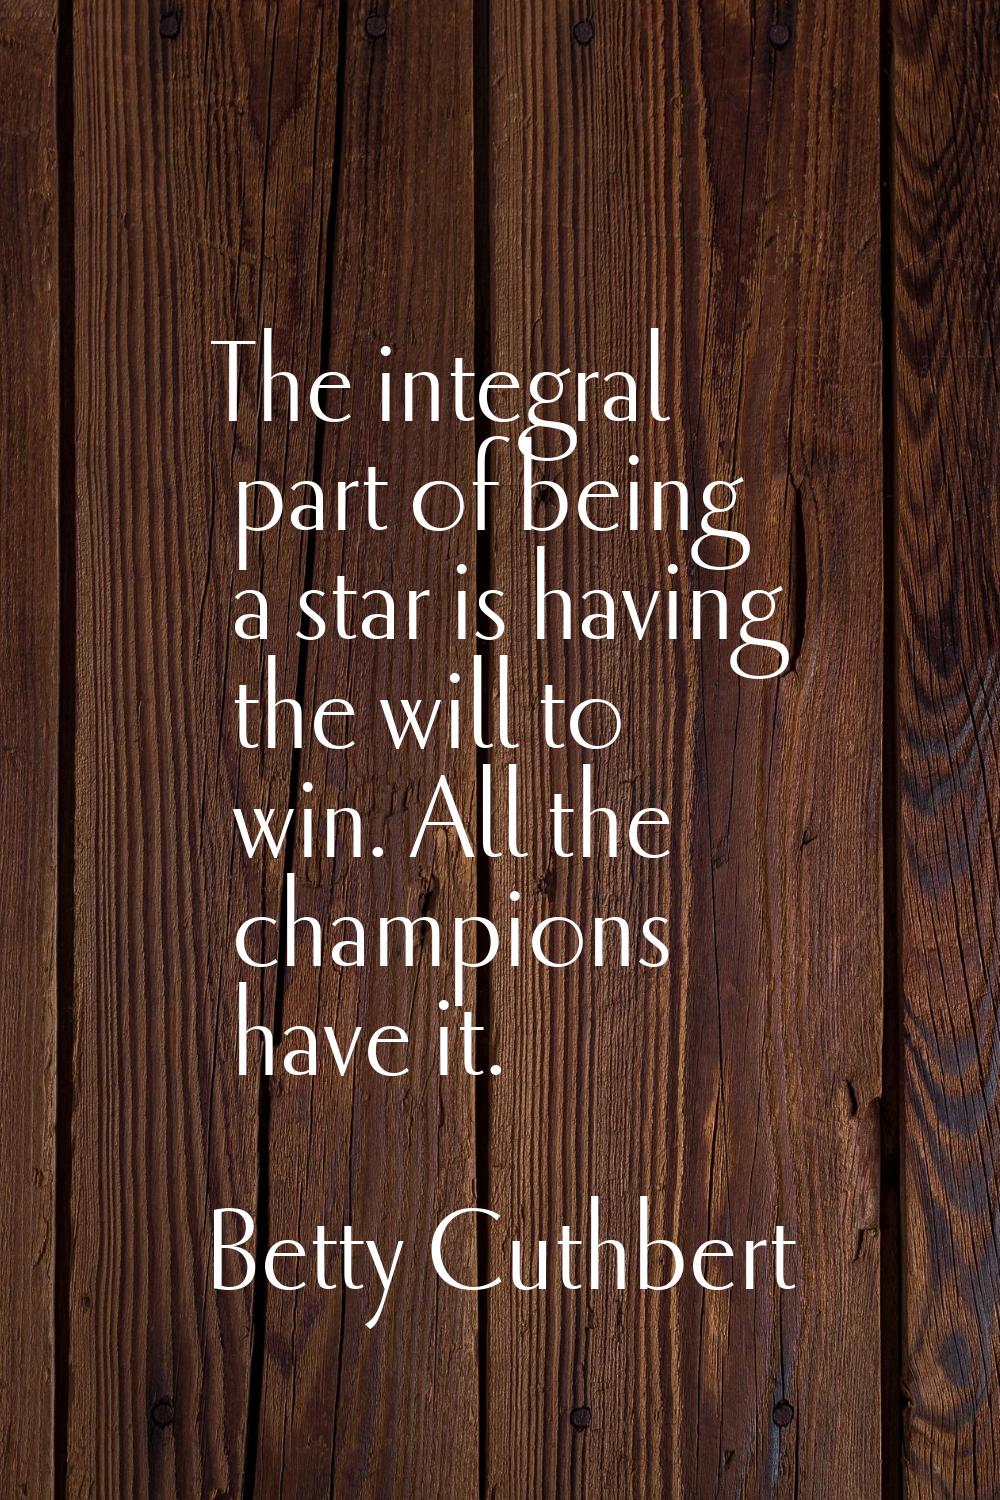 The integral part of being a star is having the will to win. All the champions have it.